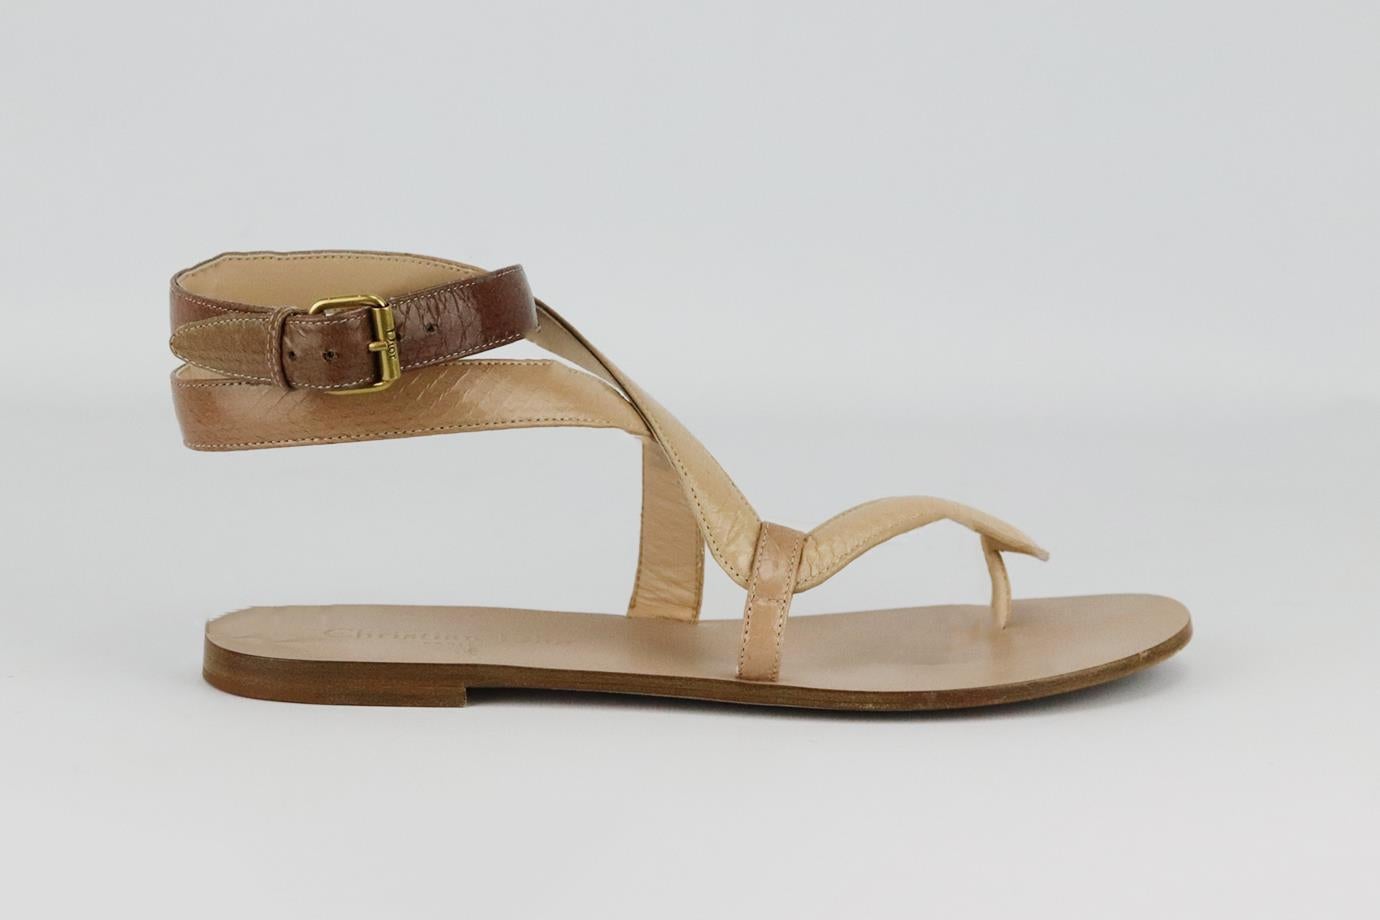 Christian Dior Poison-D snake effect leather sandals. Ombré nude. Buckle fastening at side. Does not come with box or dustbag. Size: EU 38 (UK 5, US 8). Insole: 9.6 in. Heel: 0.5 in
